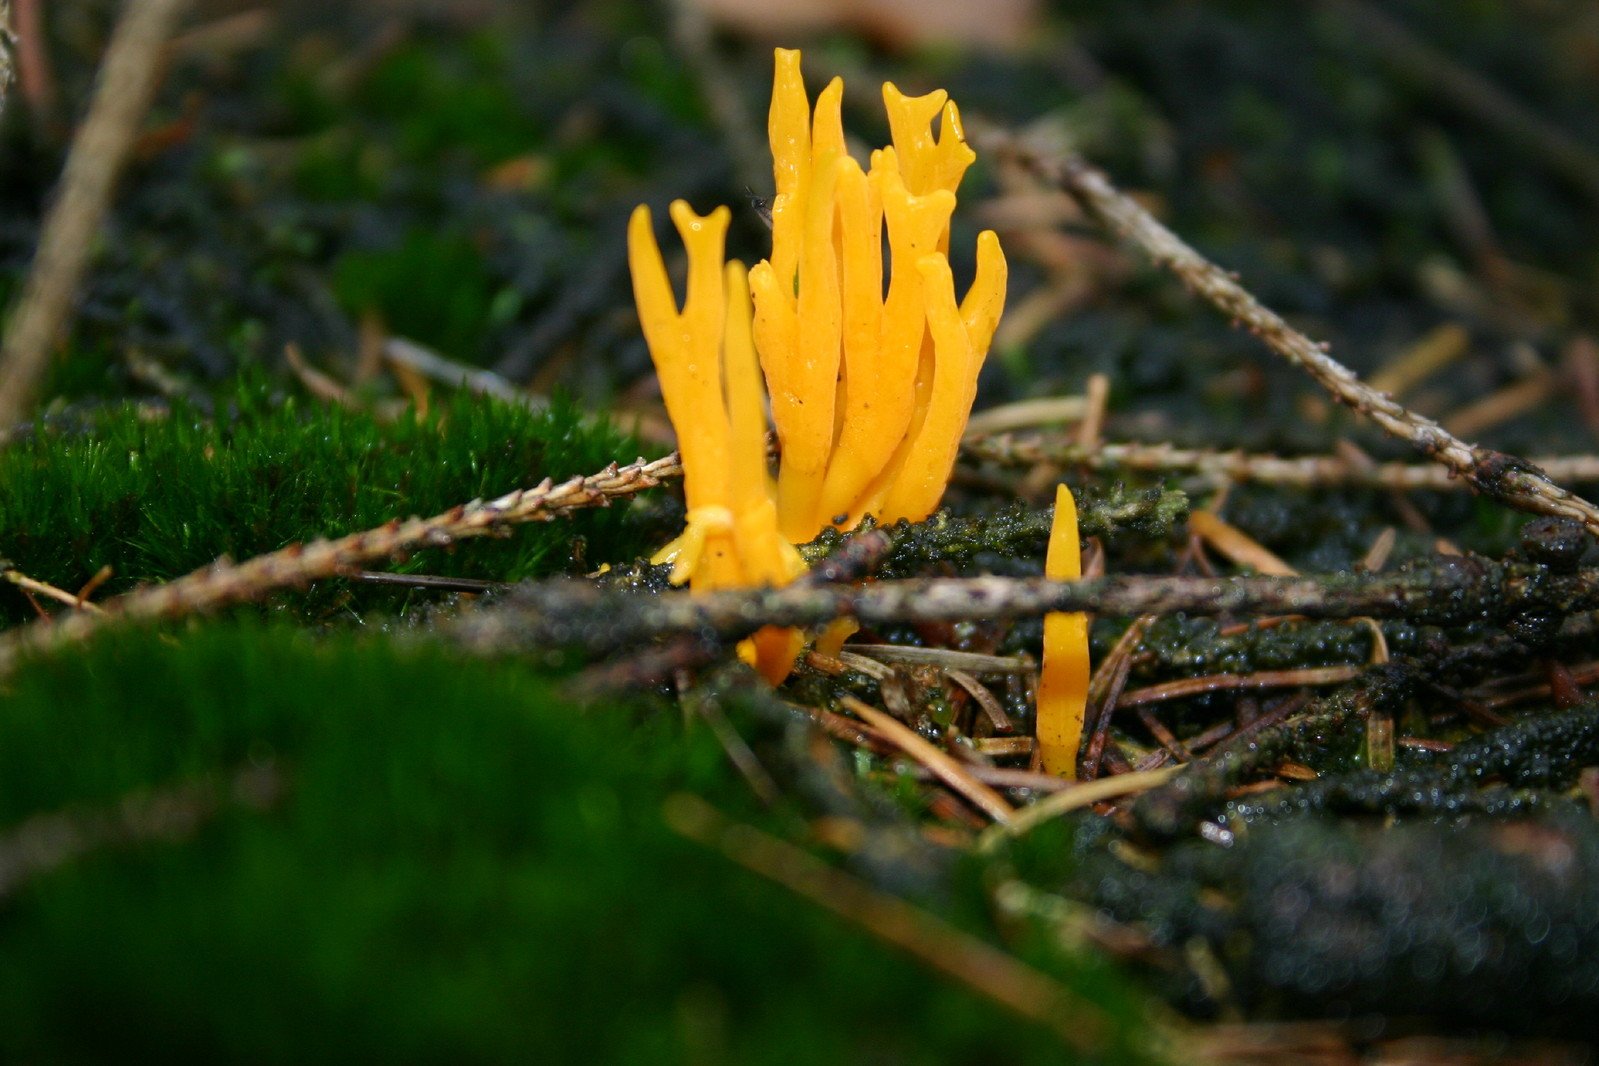 yellow mushrooms growing on the ground with moss